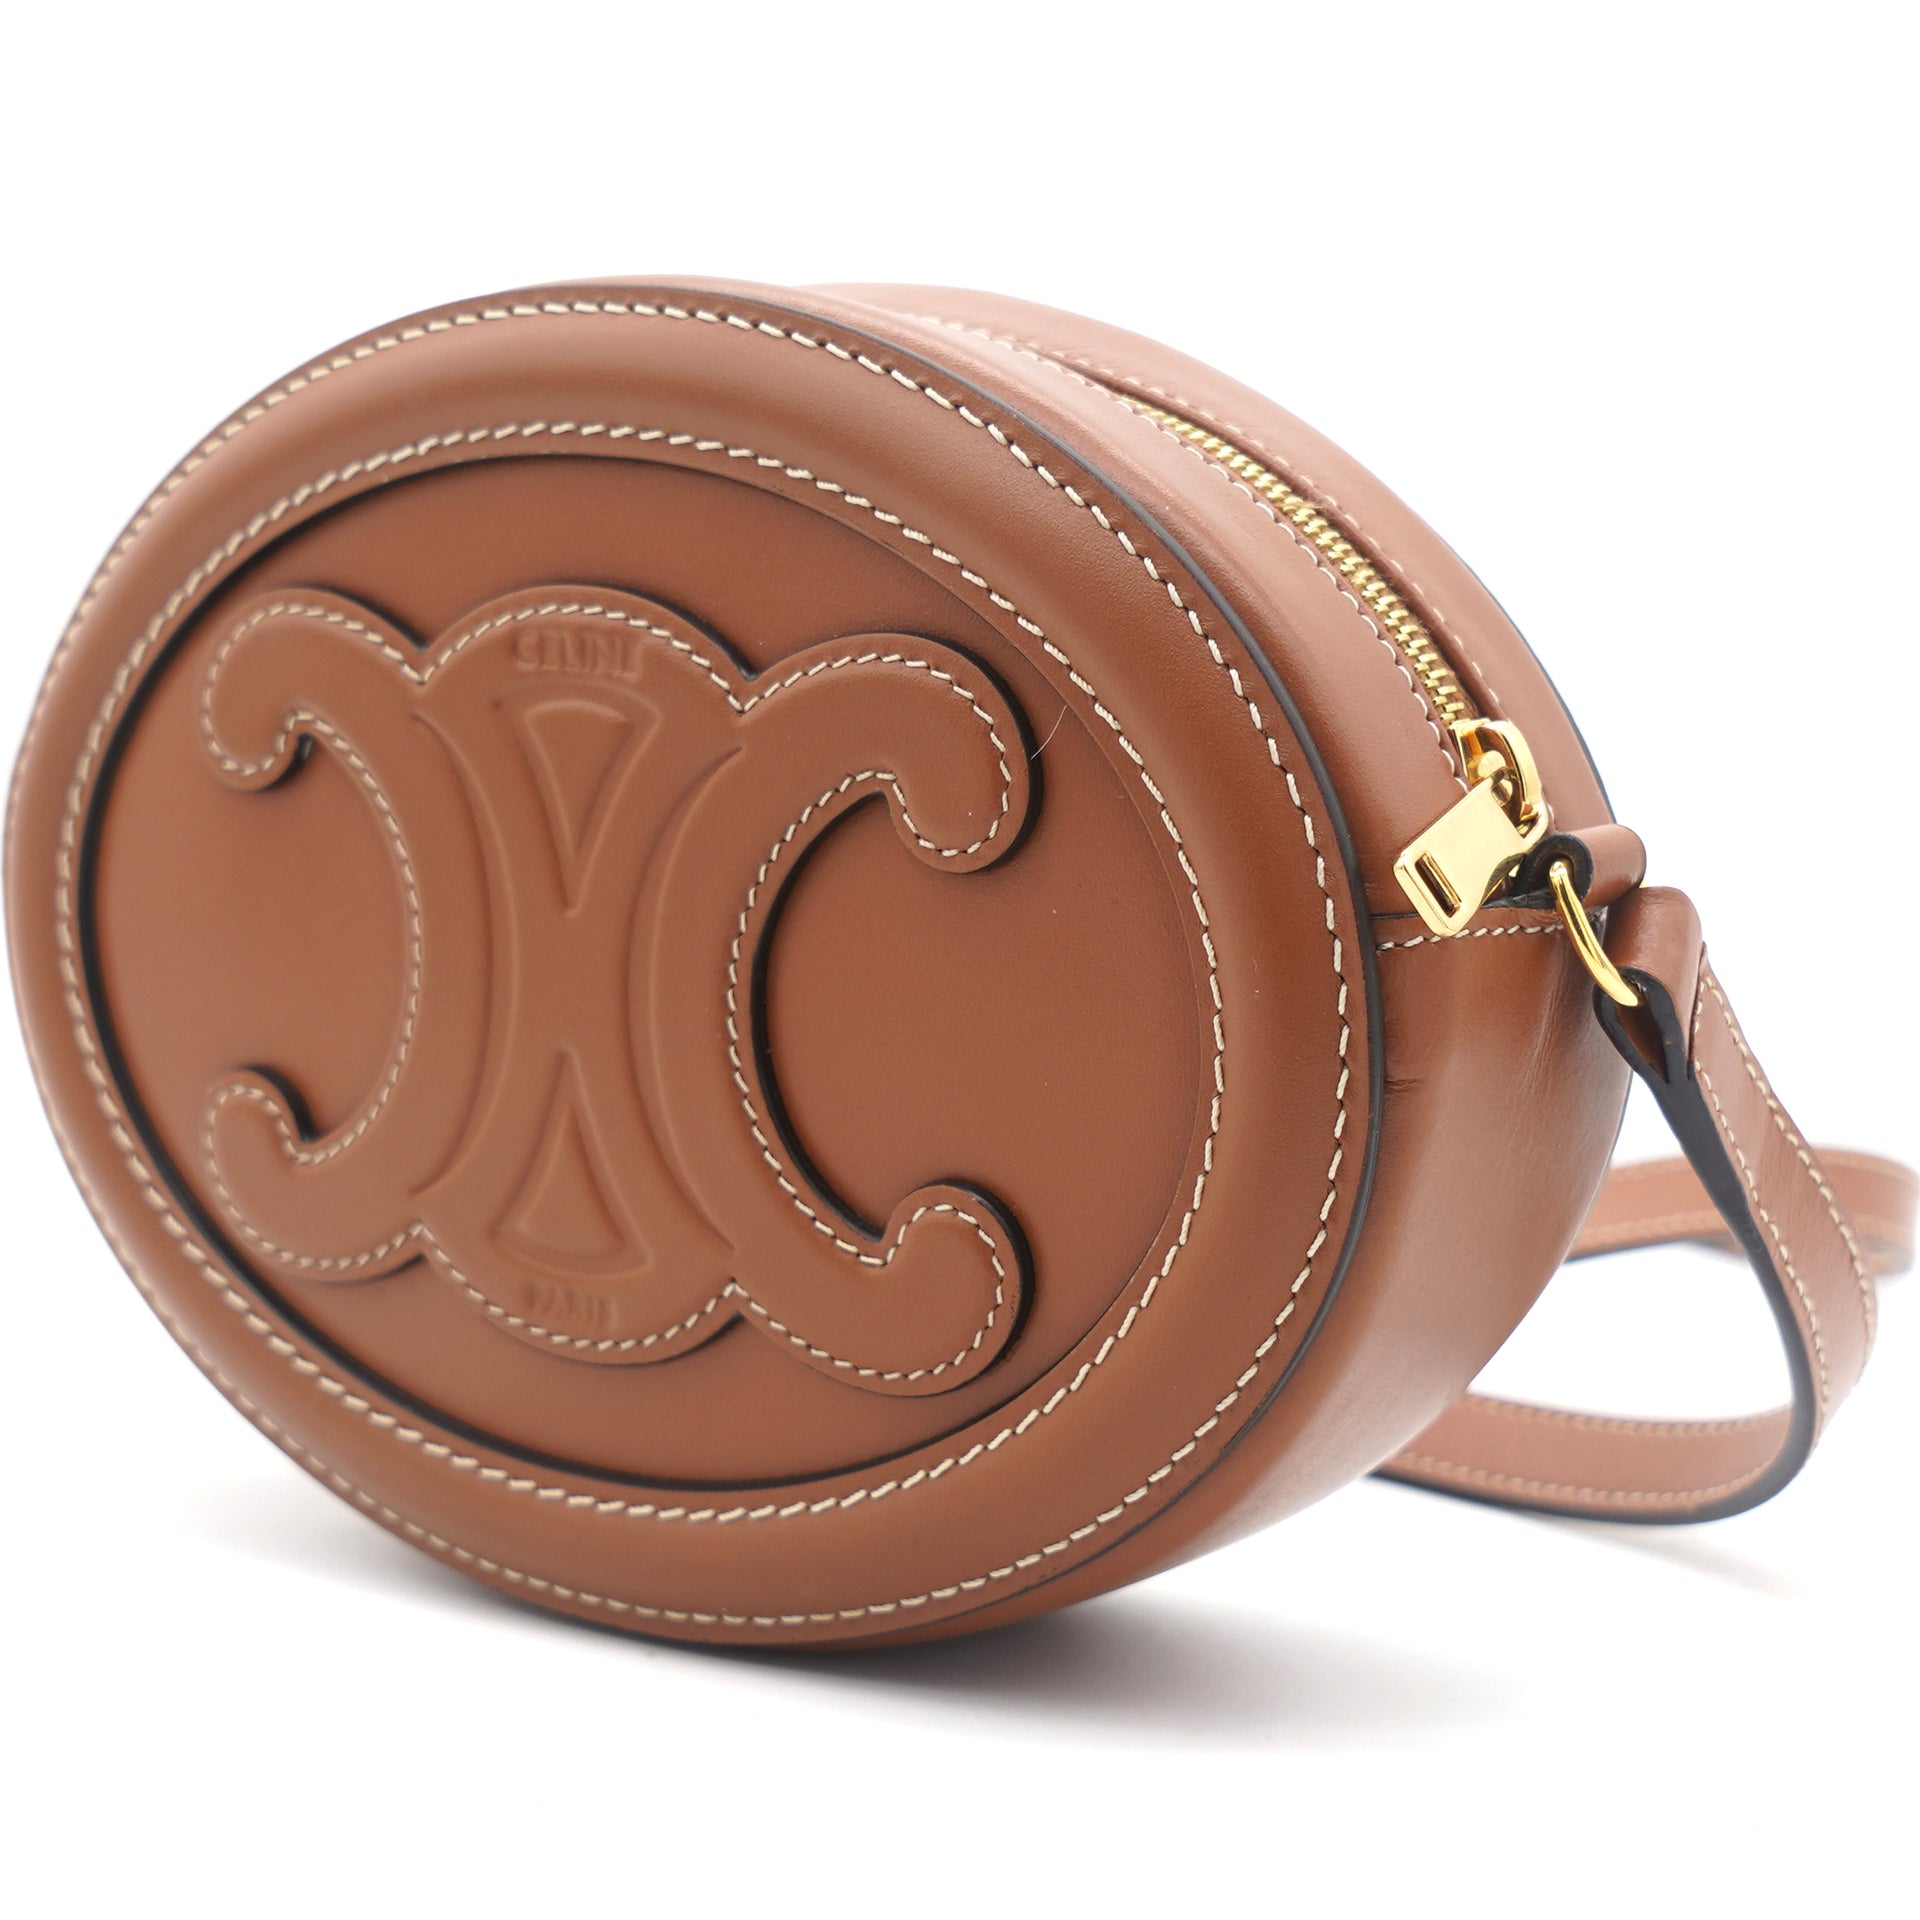 CROSSBODY OVAL PURSE CUIR TRIOMPHE IN TEXTILE AND CALFSKIN